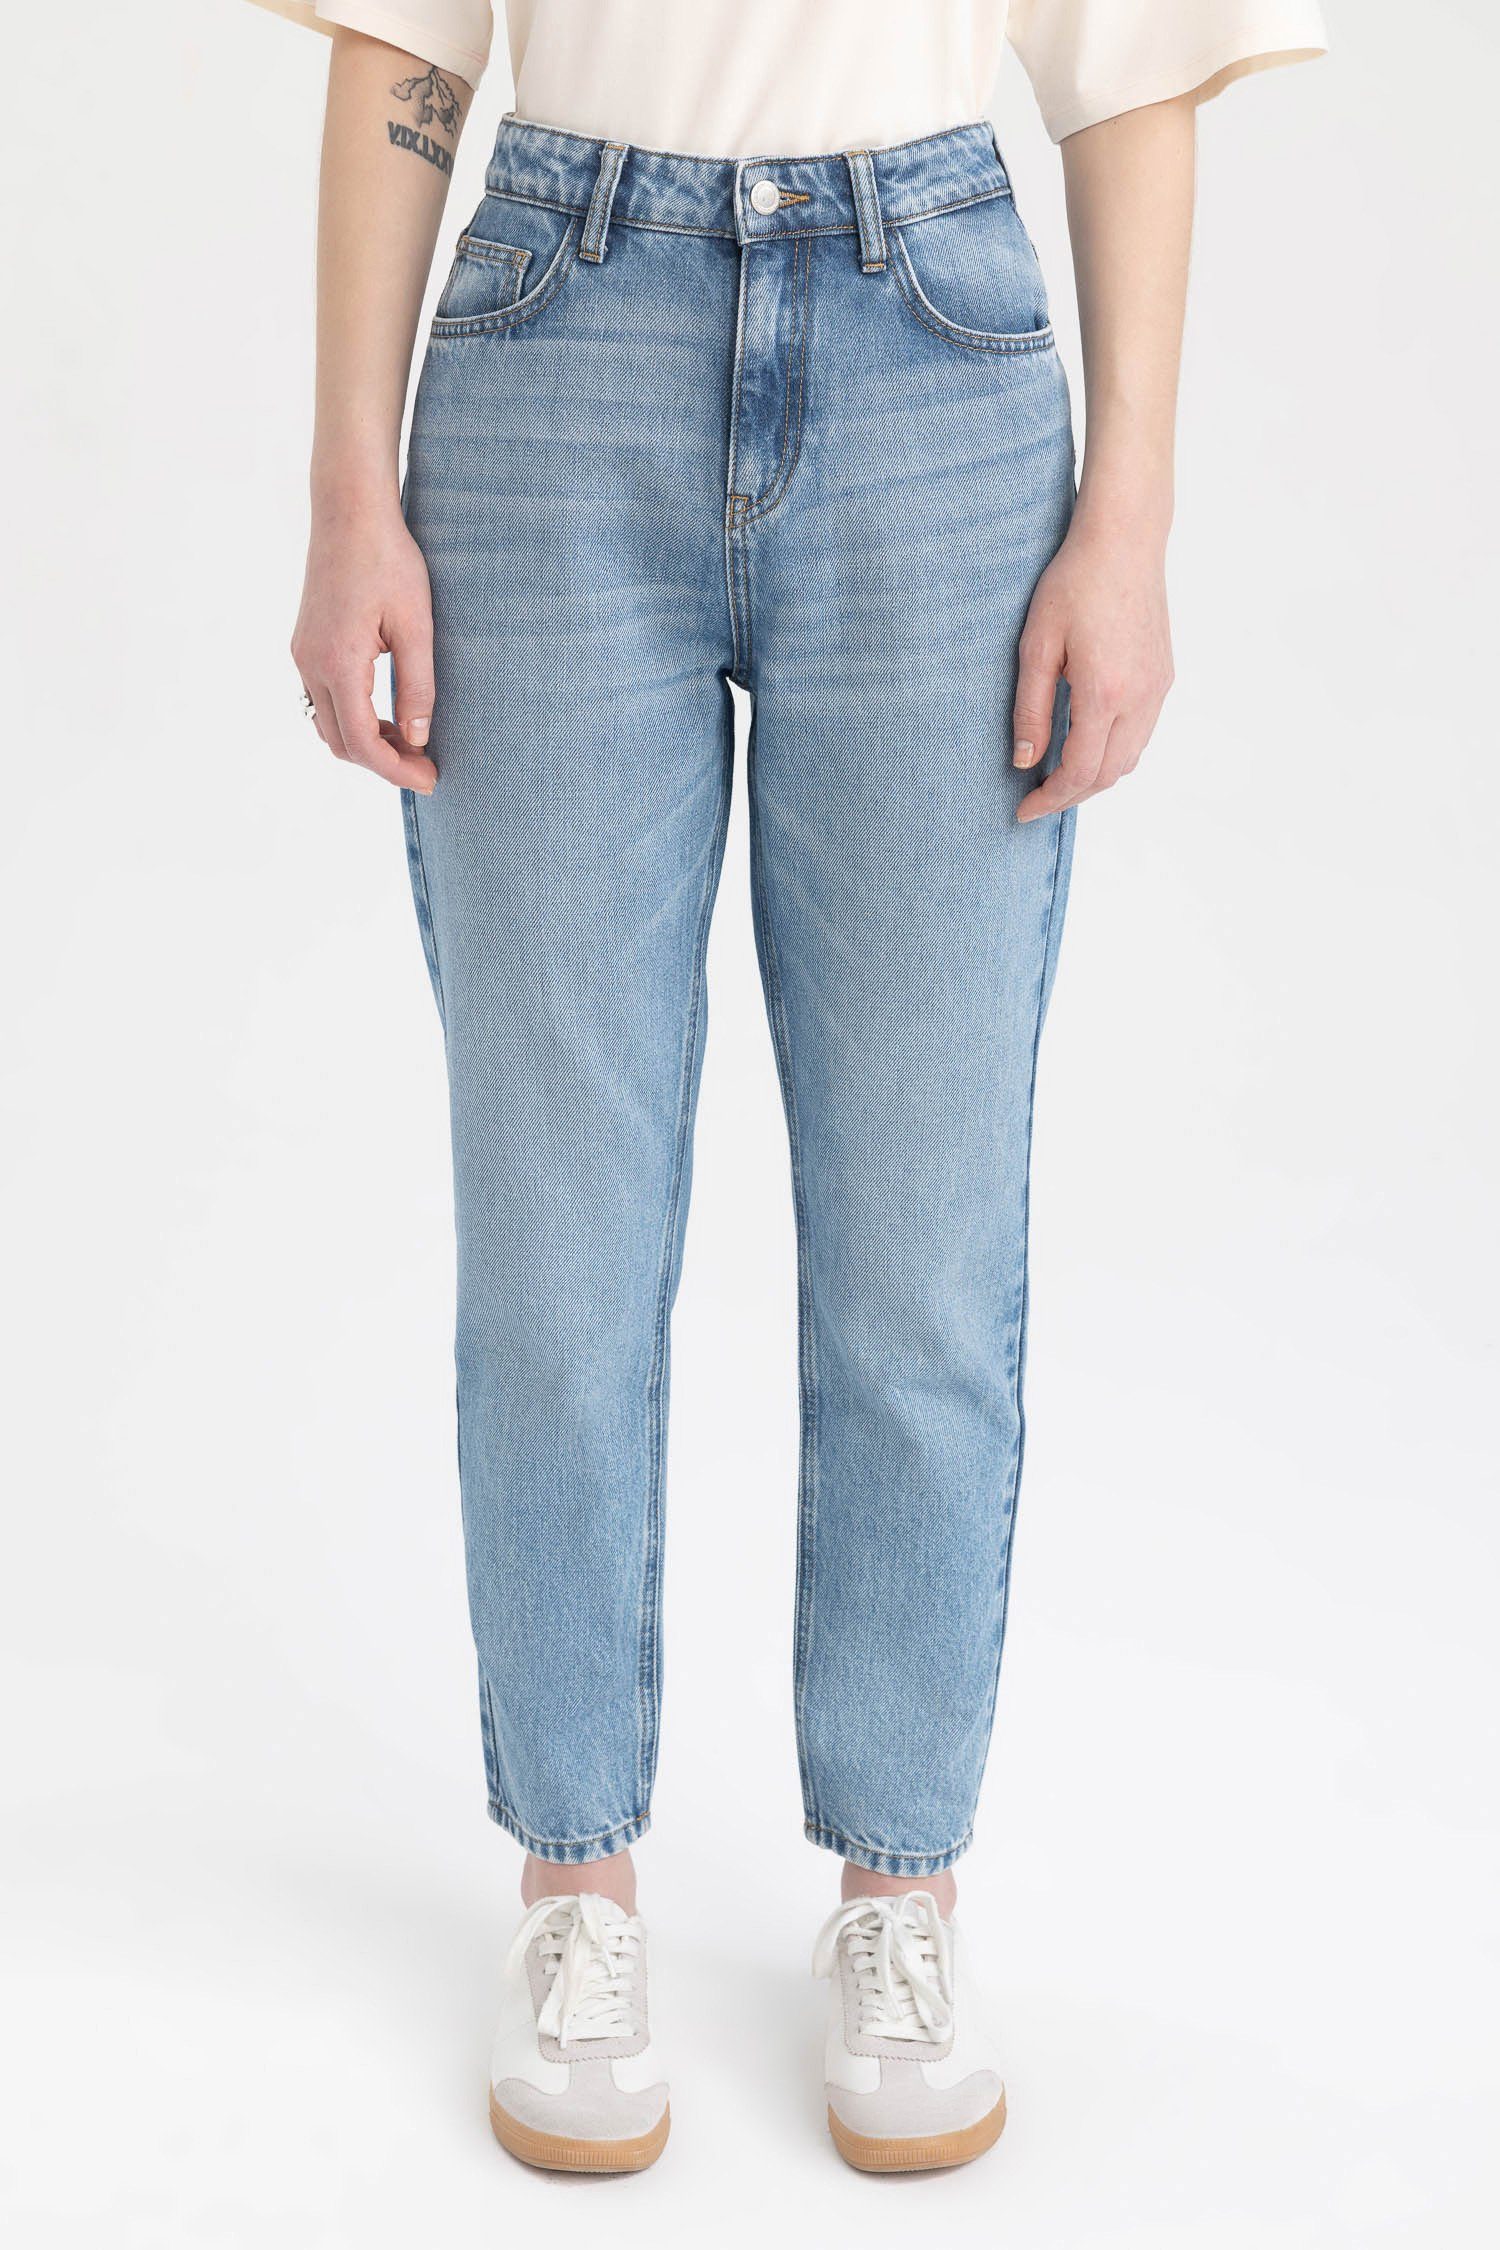 DeFacto Mom-Jeans Mom-Jeans Damen FIT MOM